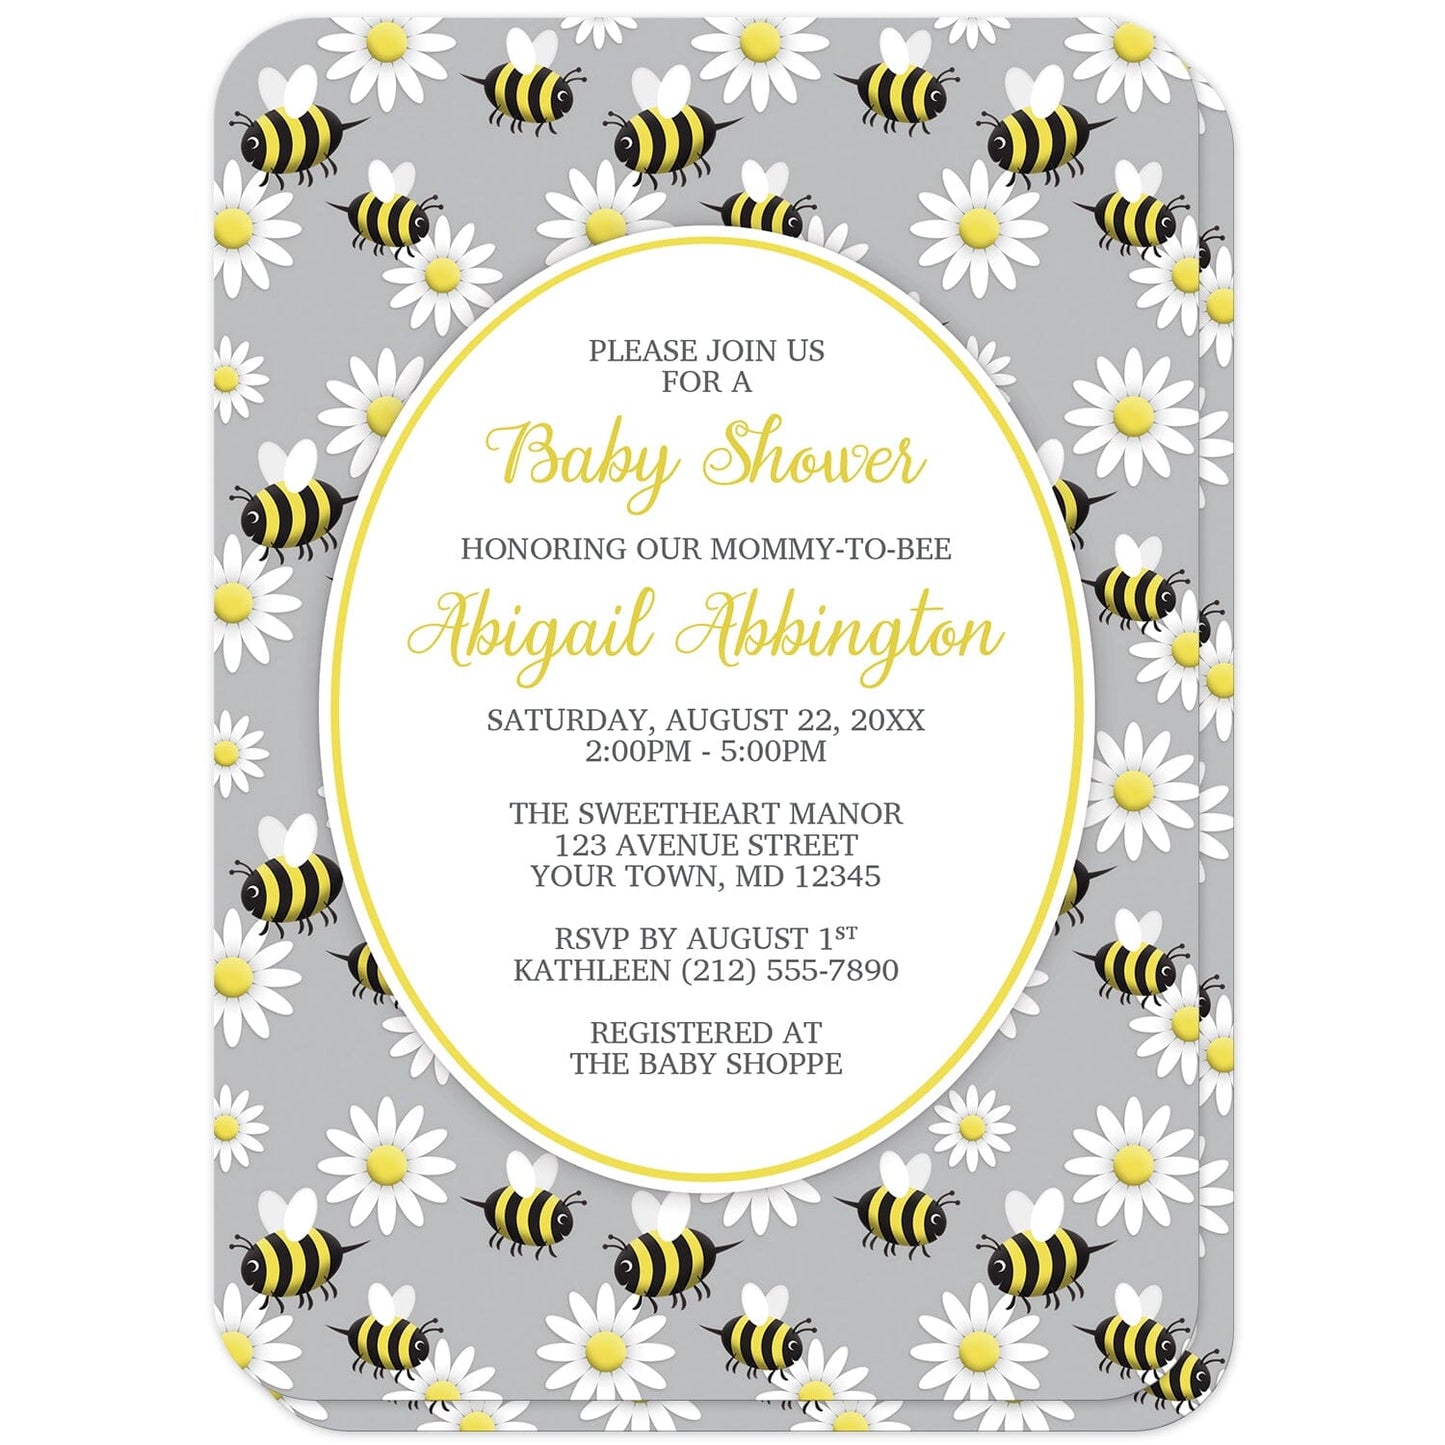 Happy Bee and Daisy Pattern Baby Shower Invitations (with rounded corners) at Artistically Invited. Happy bee and daisy pattern baby shower invitations with a background featuring a pattern of a yellow and black happy bees and white daisy flowers over gray. Your personalized baby shower celebration details are custom printed in yellow and dark gray in a white oval outlined in yellow in the center.